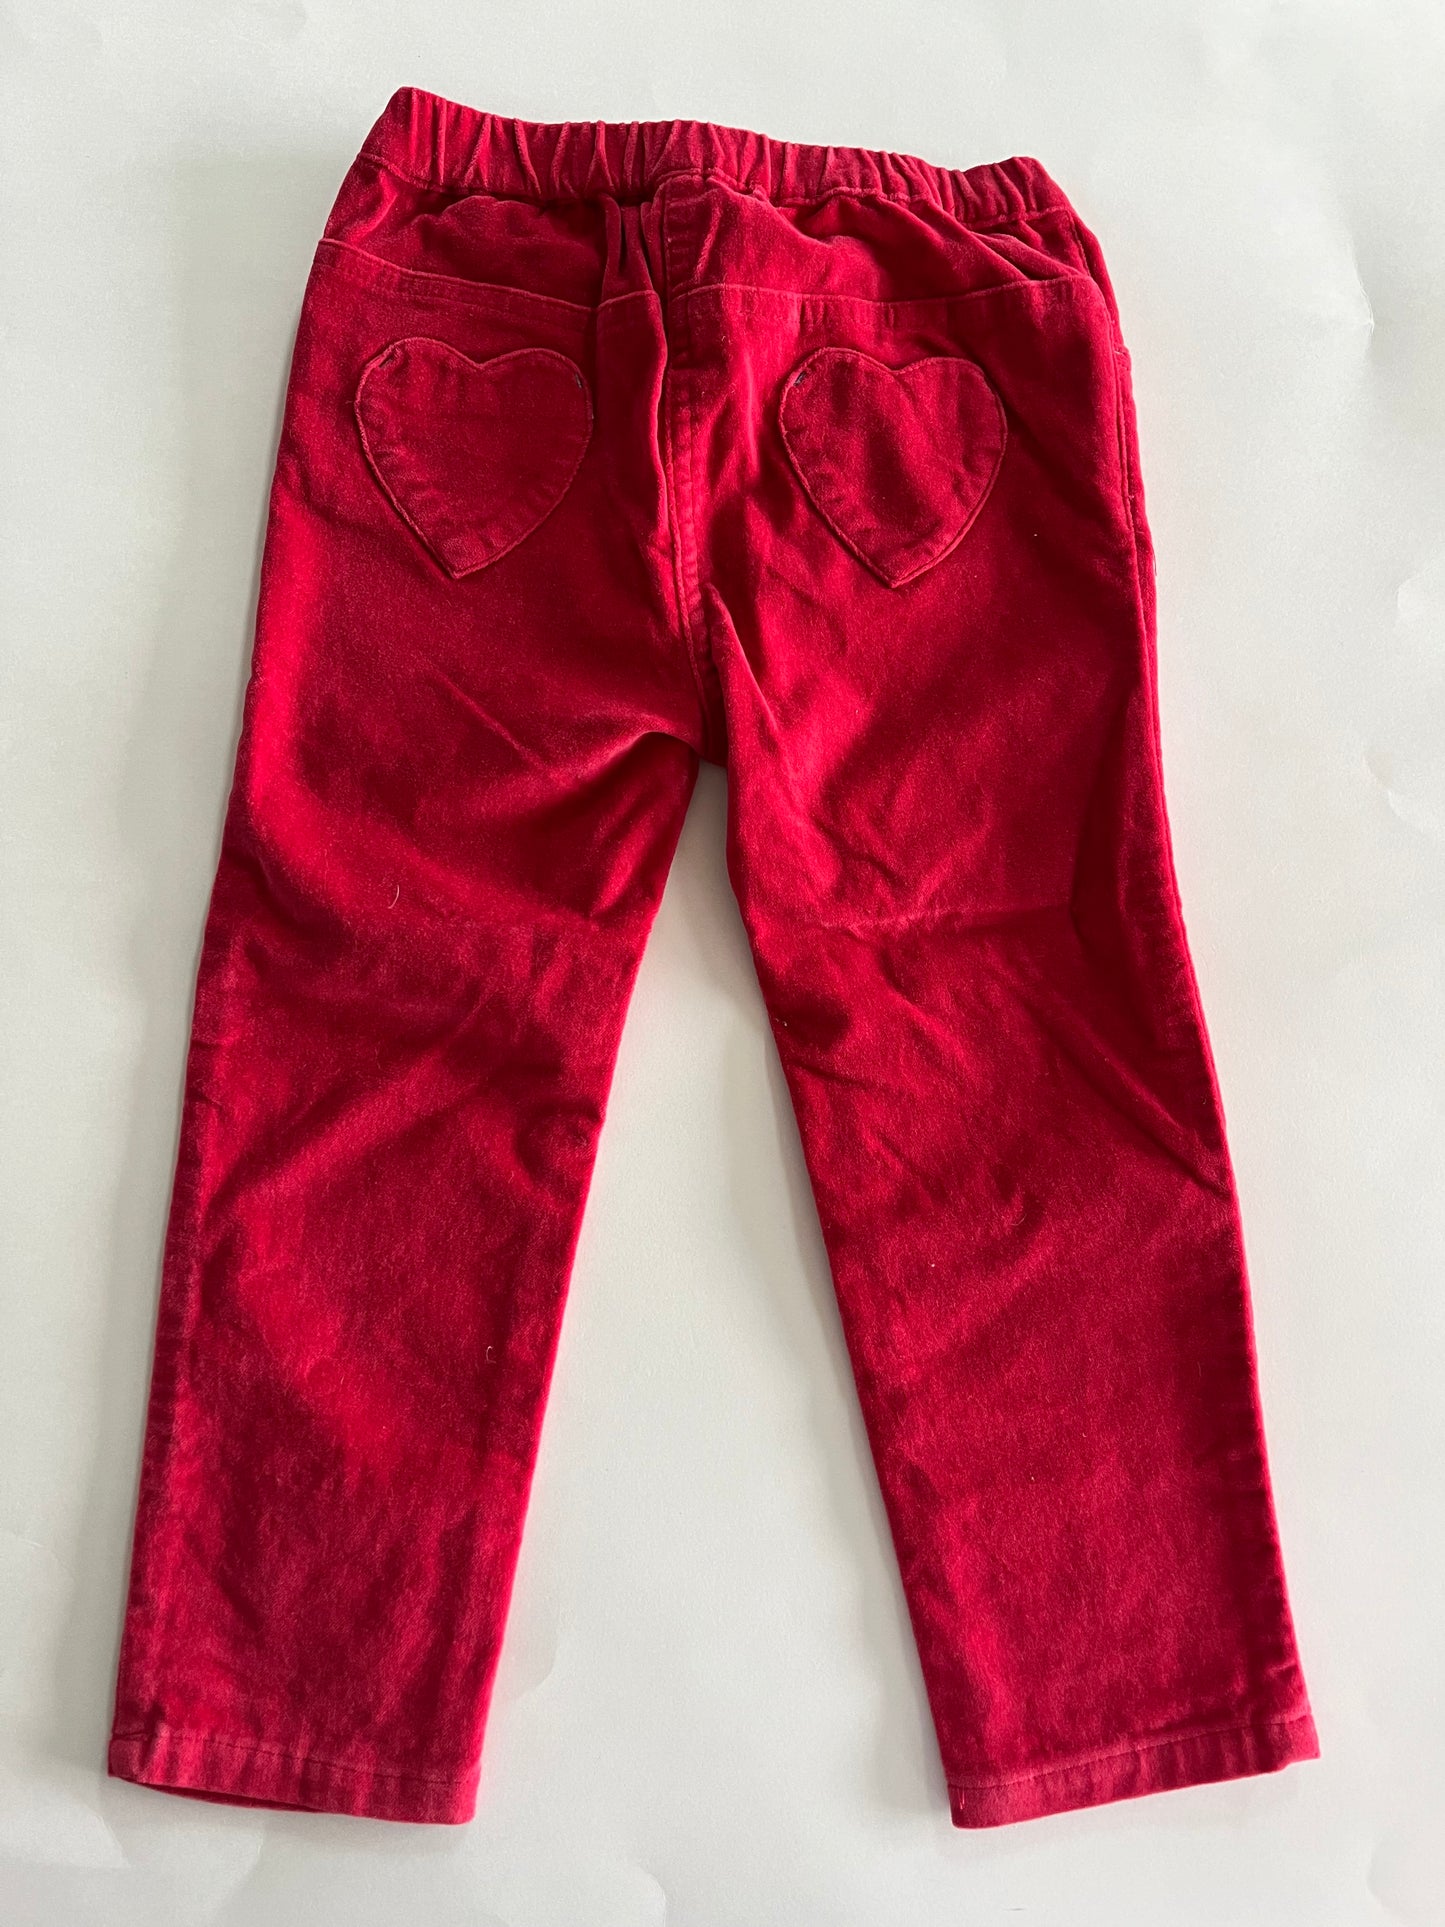 NWT Boden, Girl’s Red Cord Pants,  Sz2-3